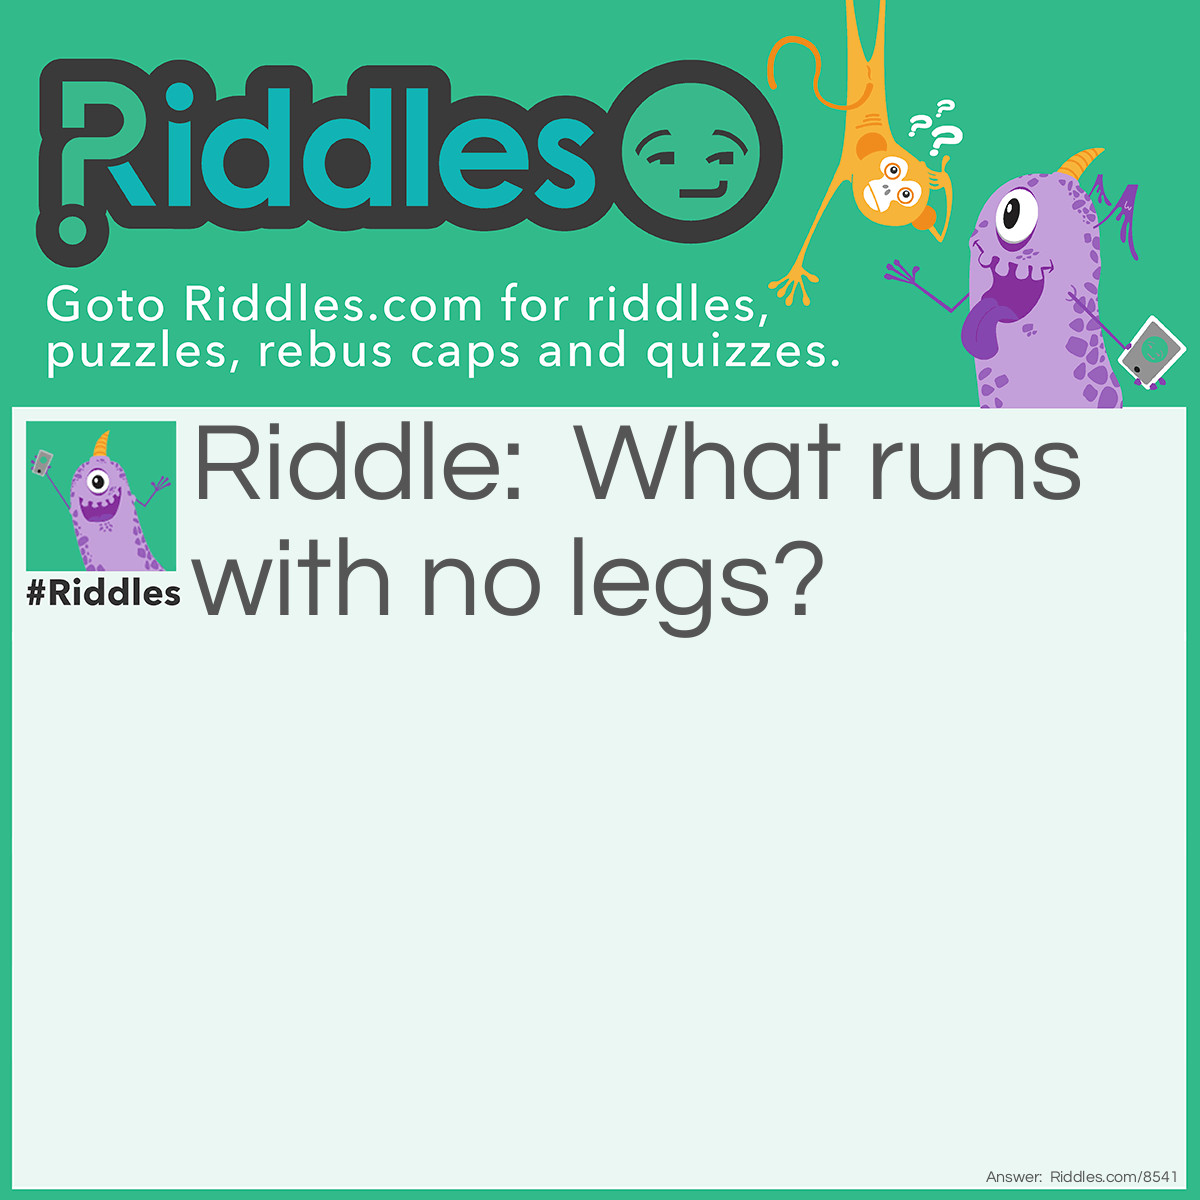 Riddle: What runs with no legs? Answer: Water!